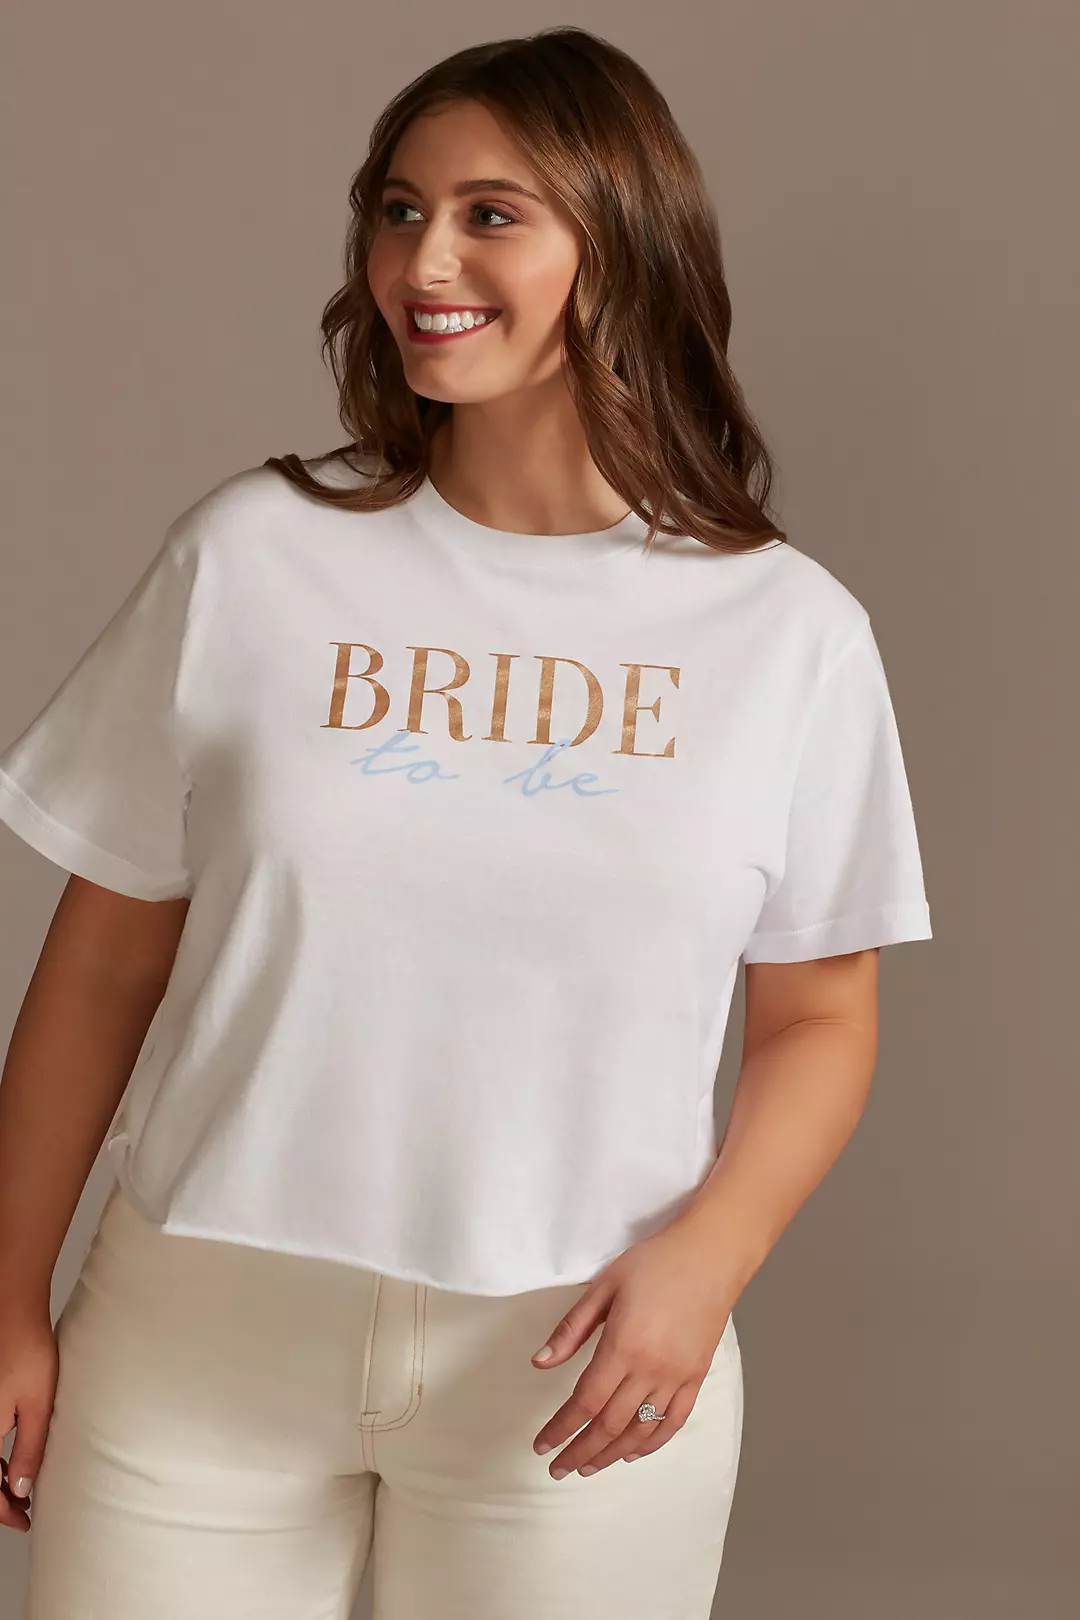 Bride to Be Tee Image